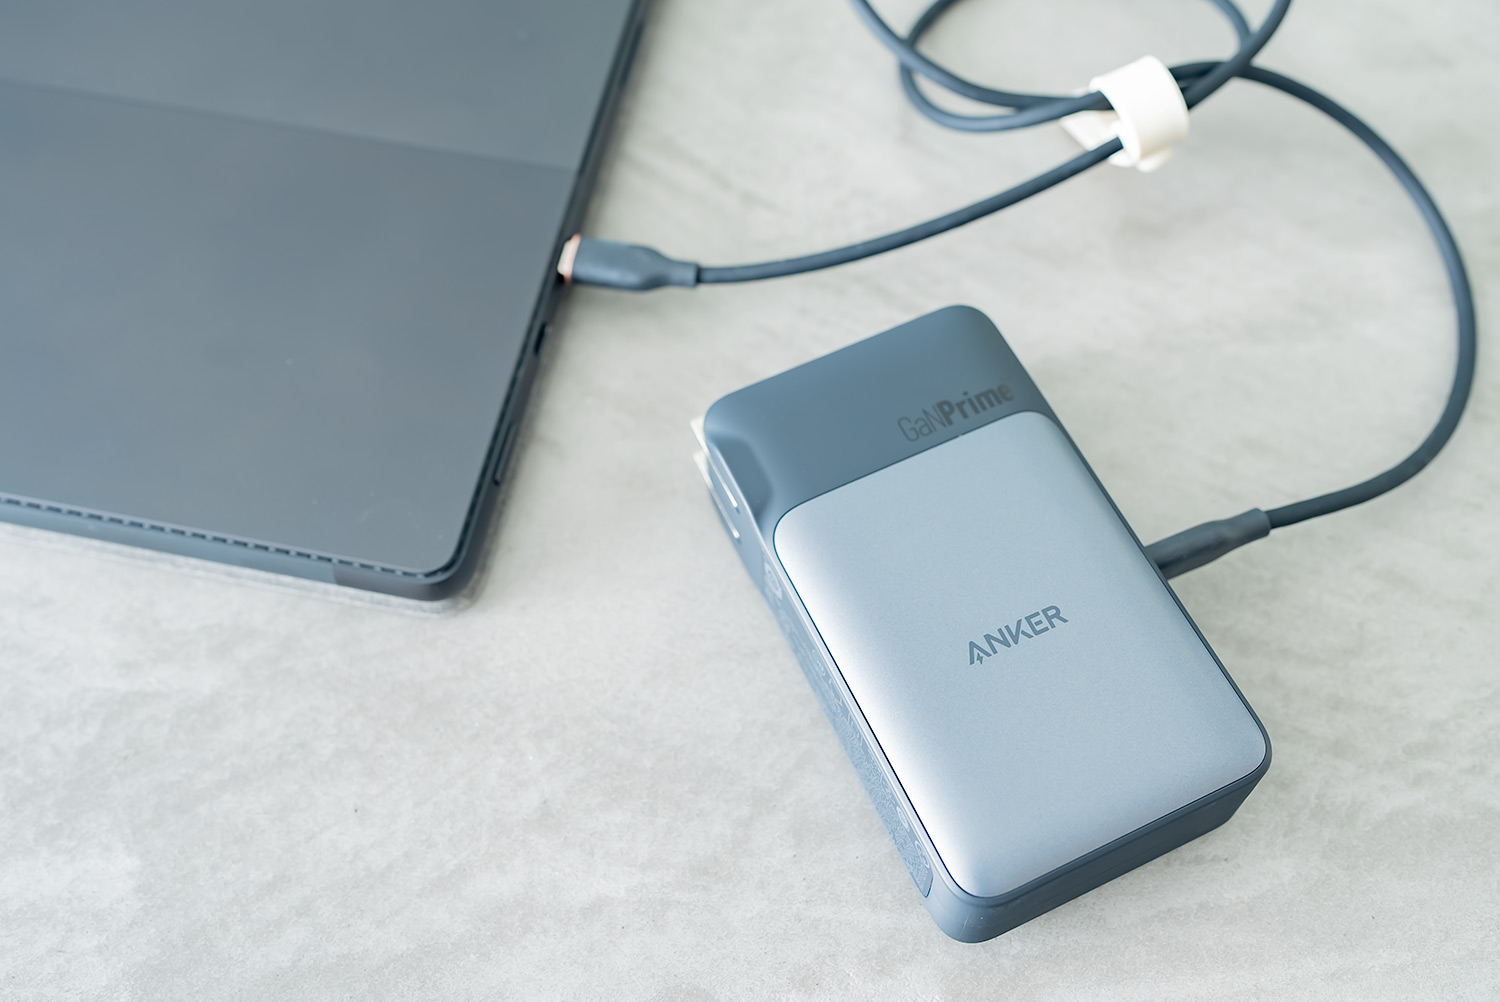 Anker 733 Power Bank 使用イメージ